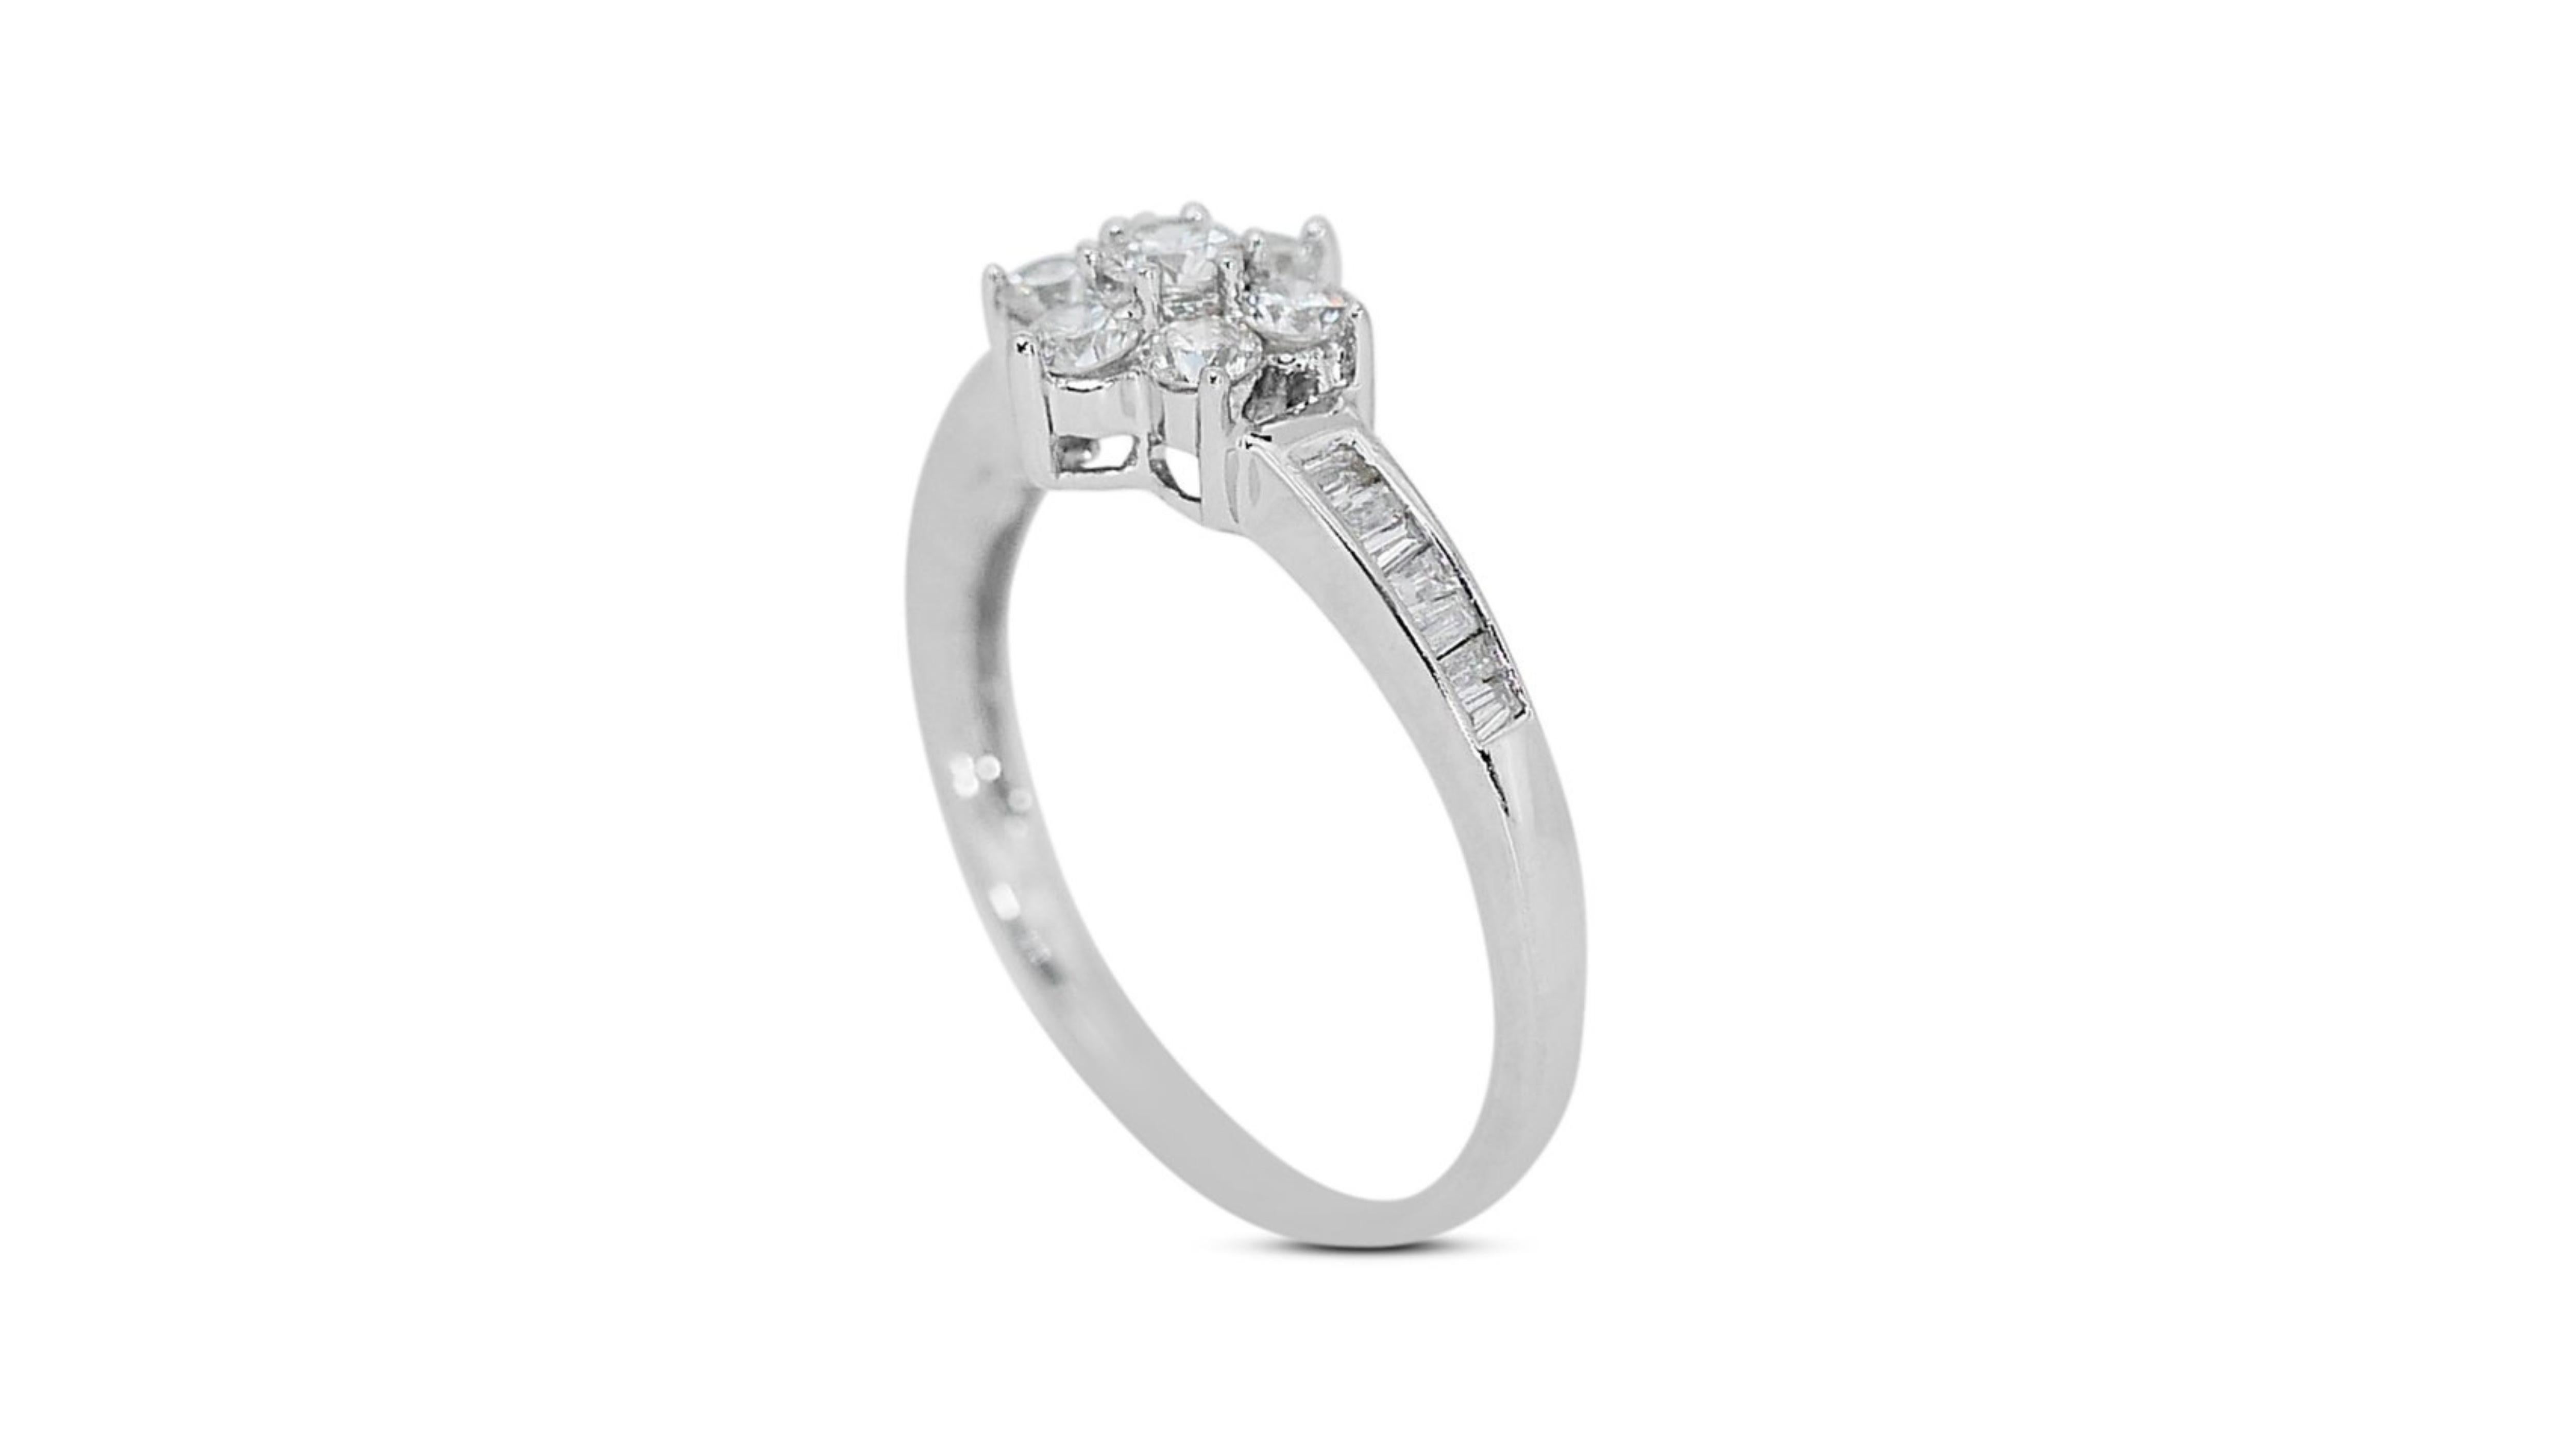 Solitaire 18k White Gold Flower Ring with 2.4 carat Natural Diamond For Sale 1